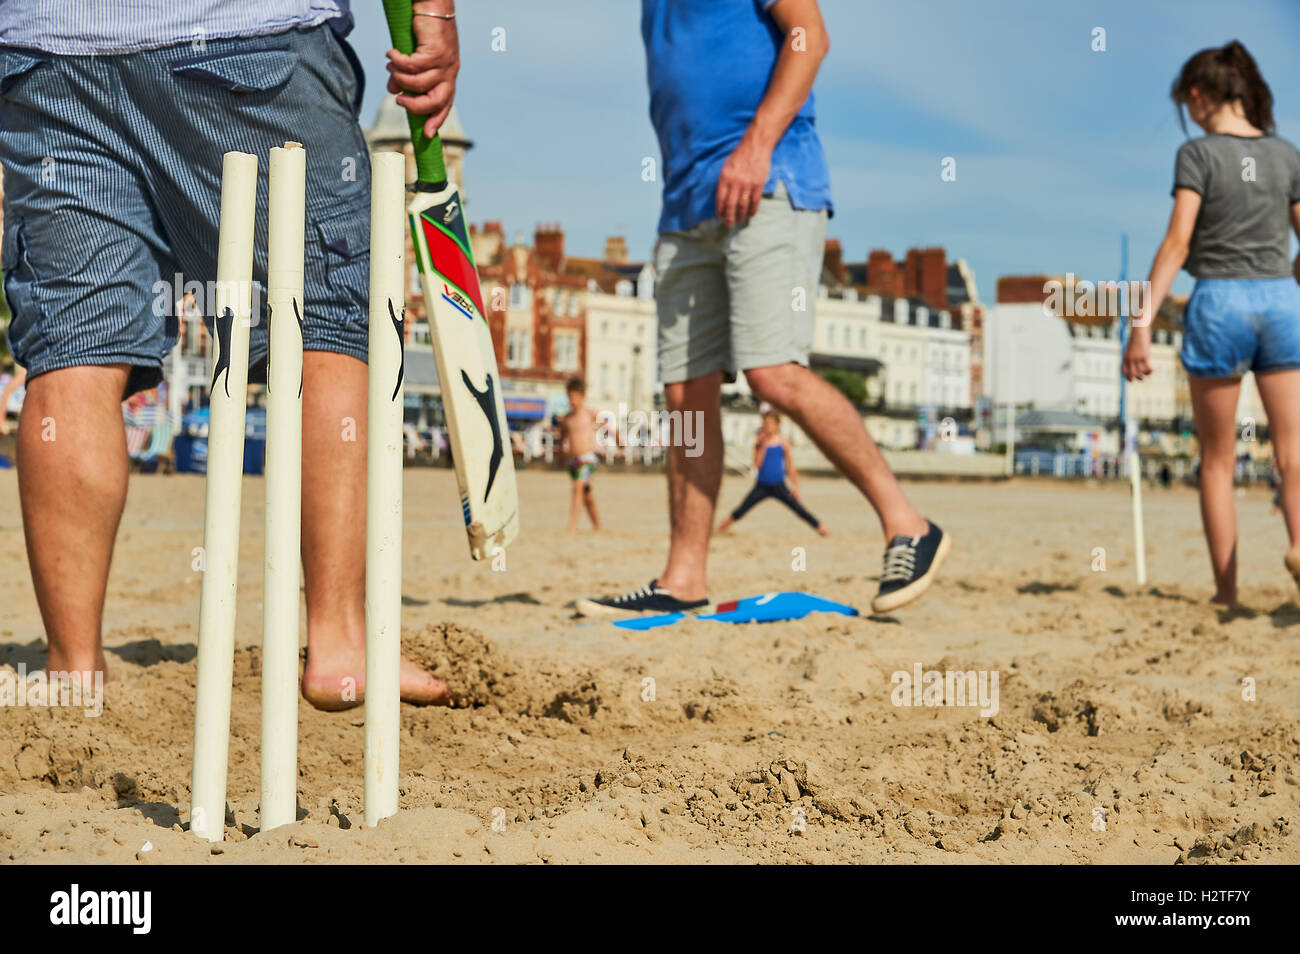 Family and friends enjoying a game of beach cricket on a sandy beach. Stock Photo